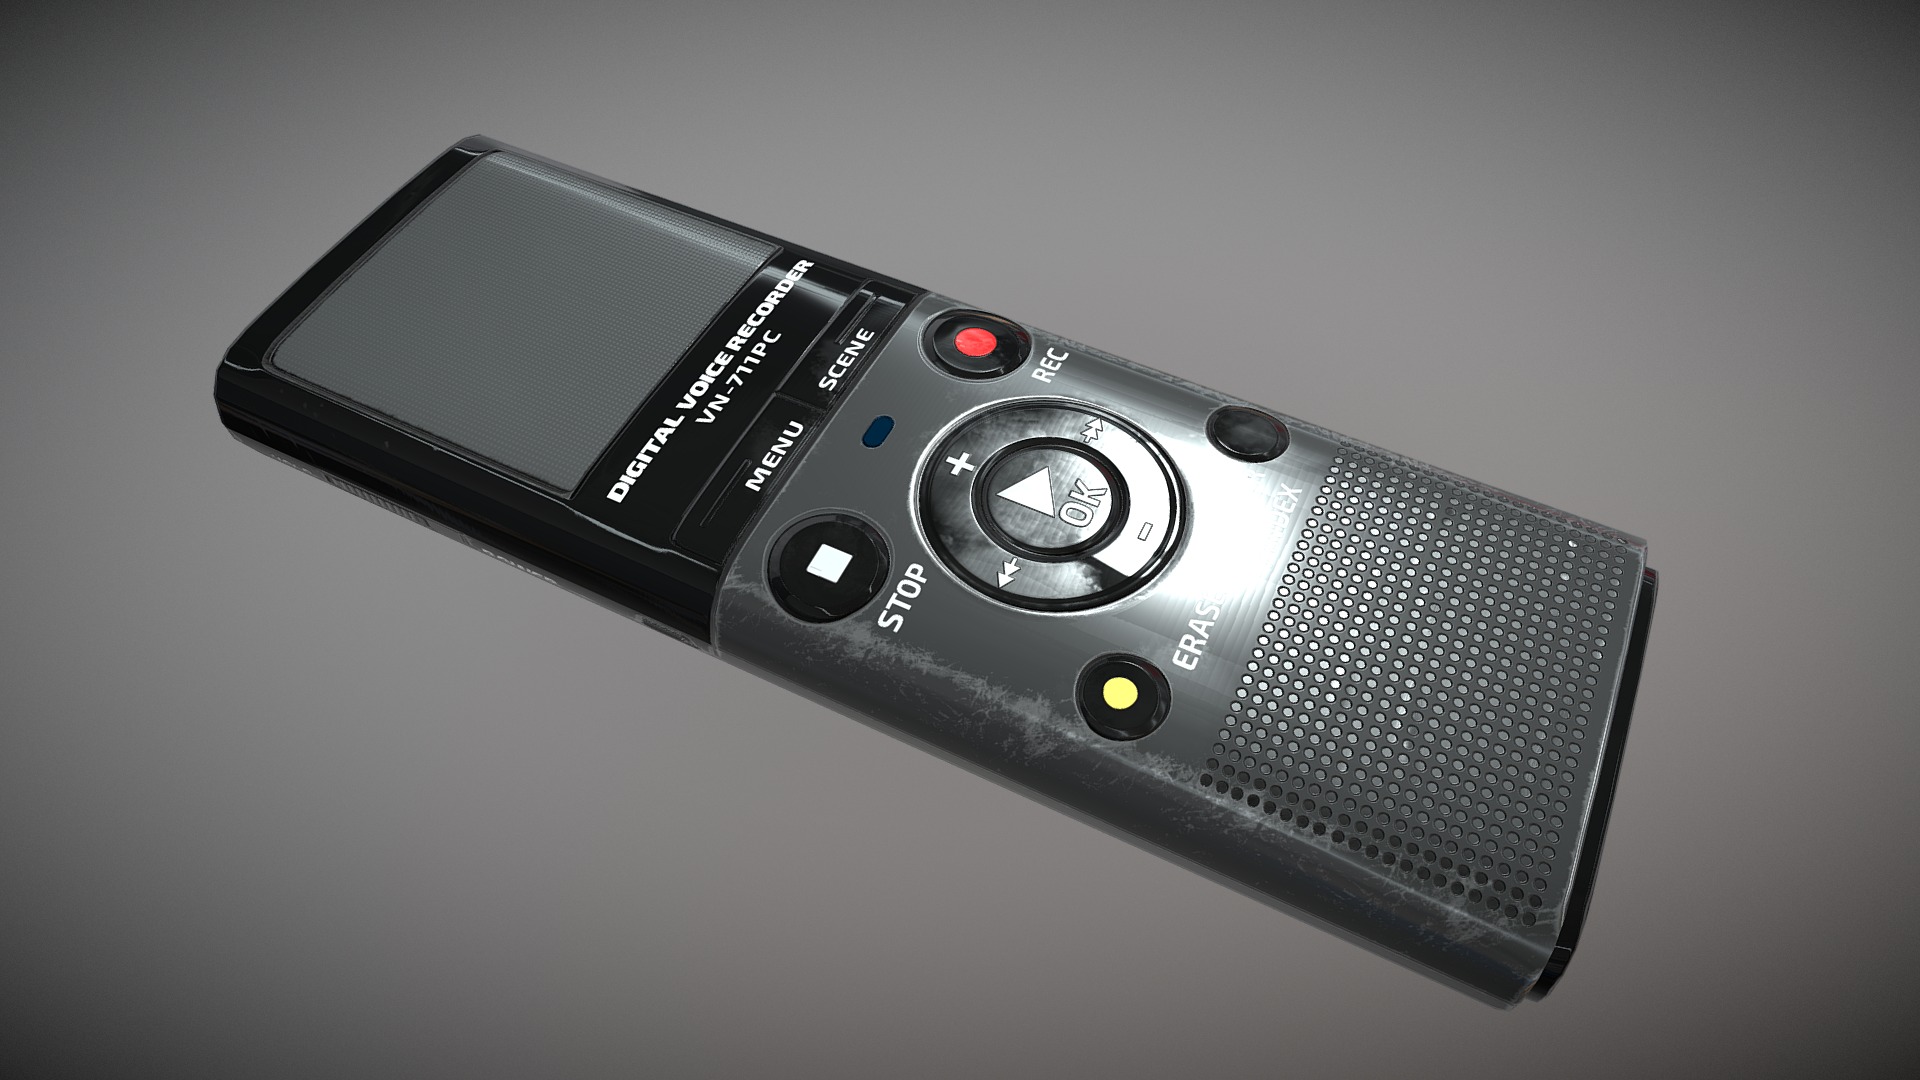 3D model Vn711pc voice recorder - This is a 3D model of the Vn711pc voice recorder. The 3D model is about a black and silver electronic device.